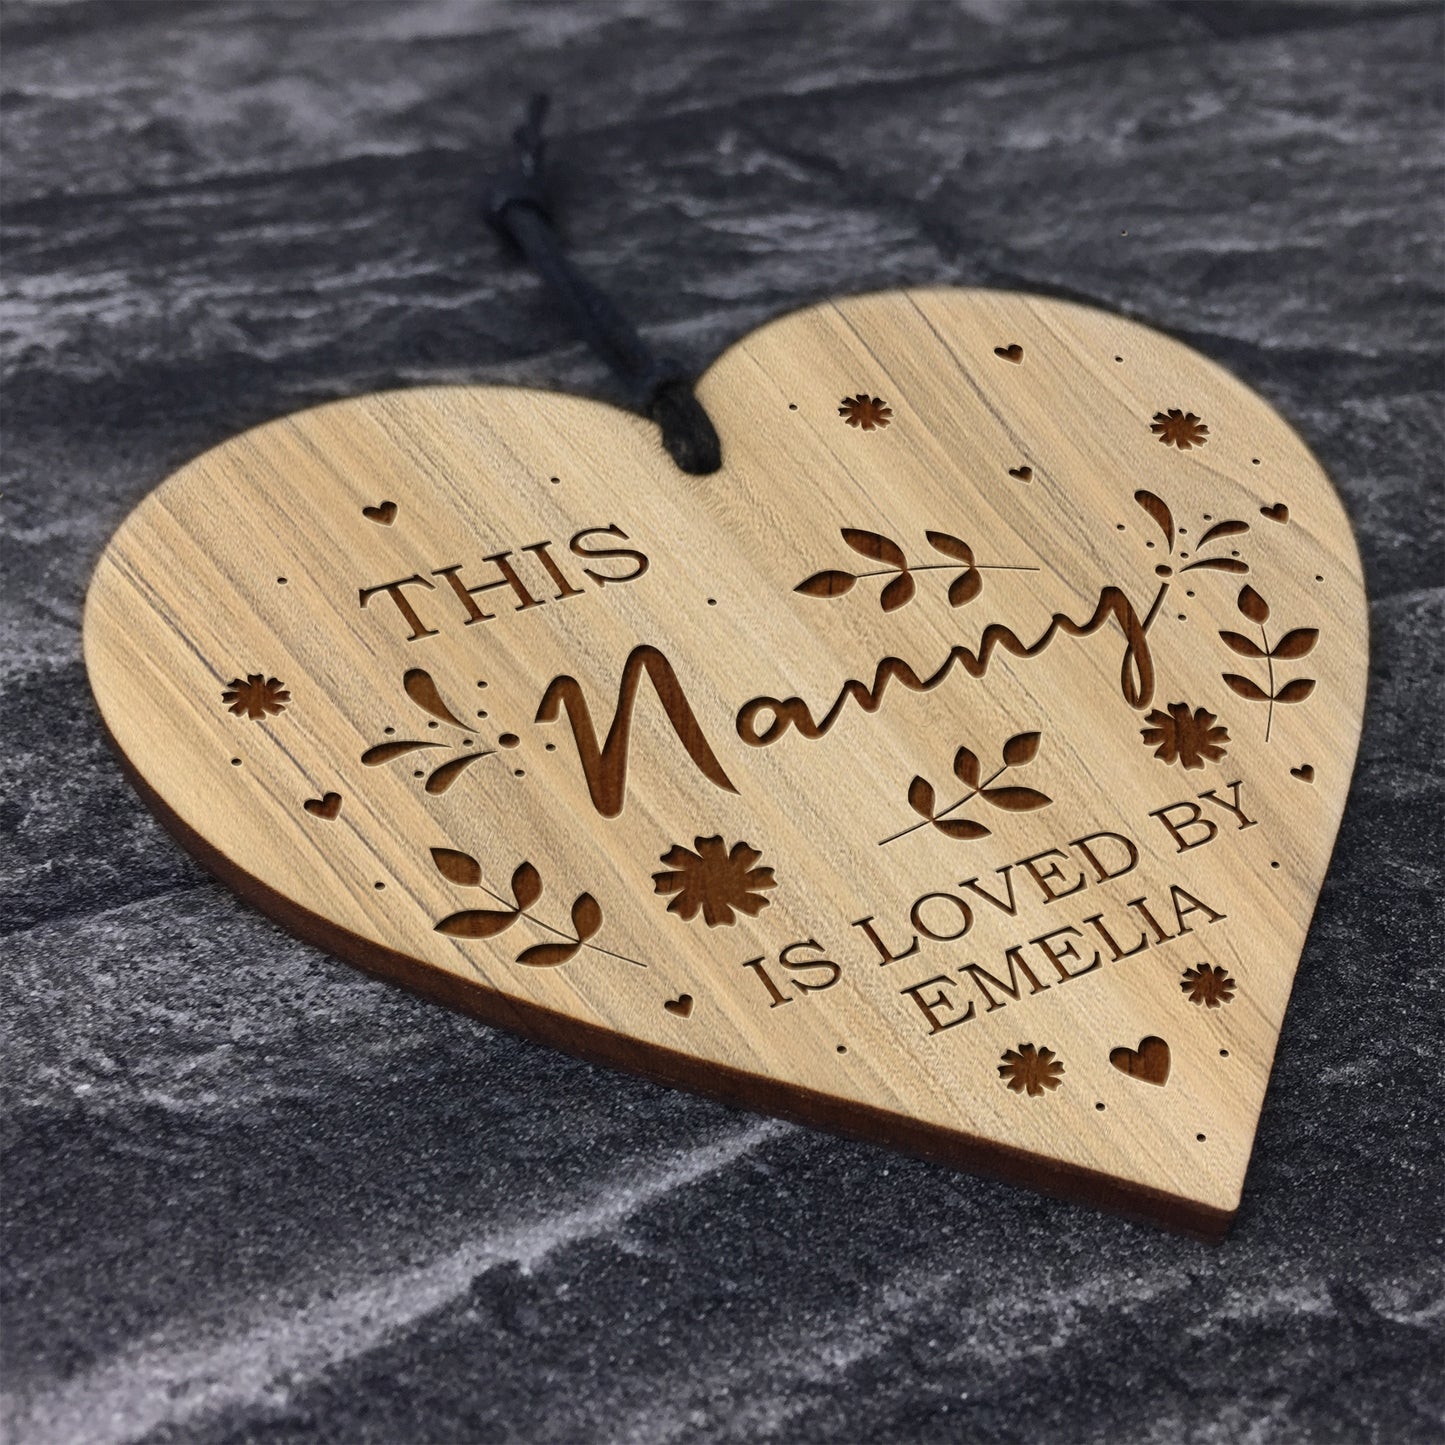 Nanny Gifts For Birthday Christmas Personalised Engraved Heart